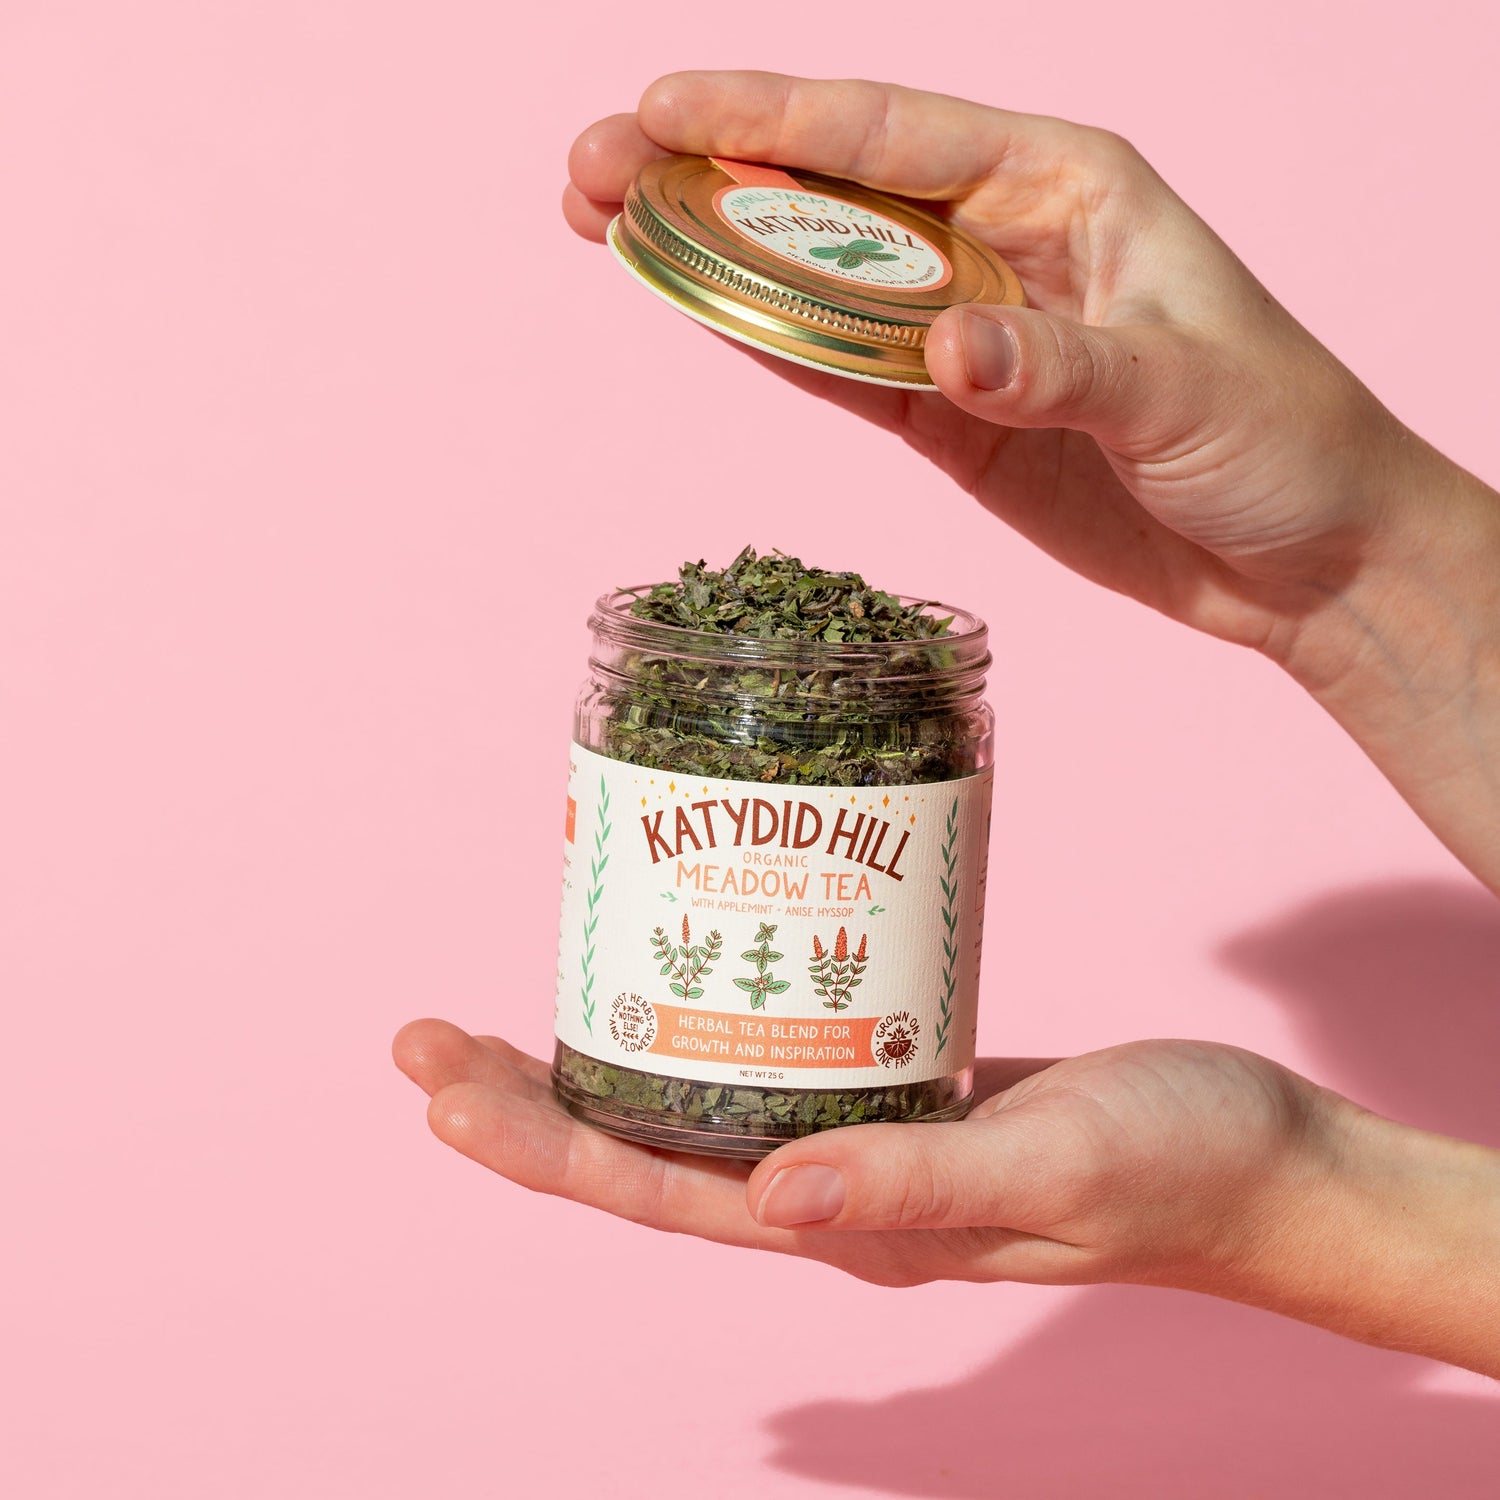 hands holding an open jar of meadow tea on pink background